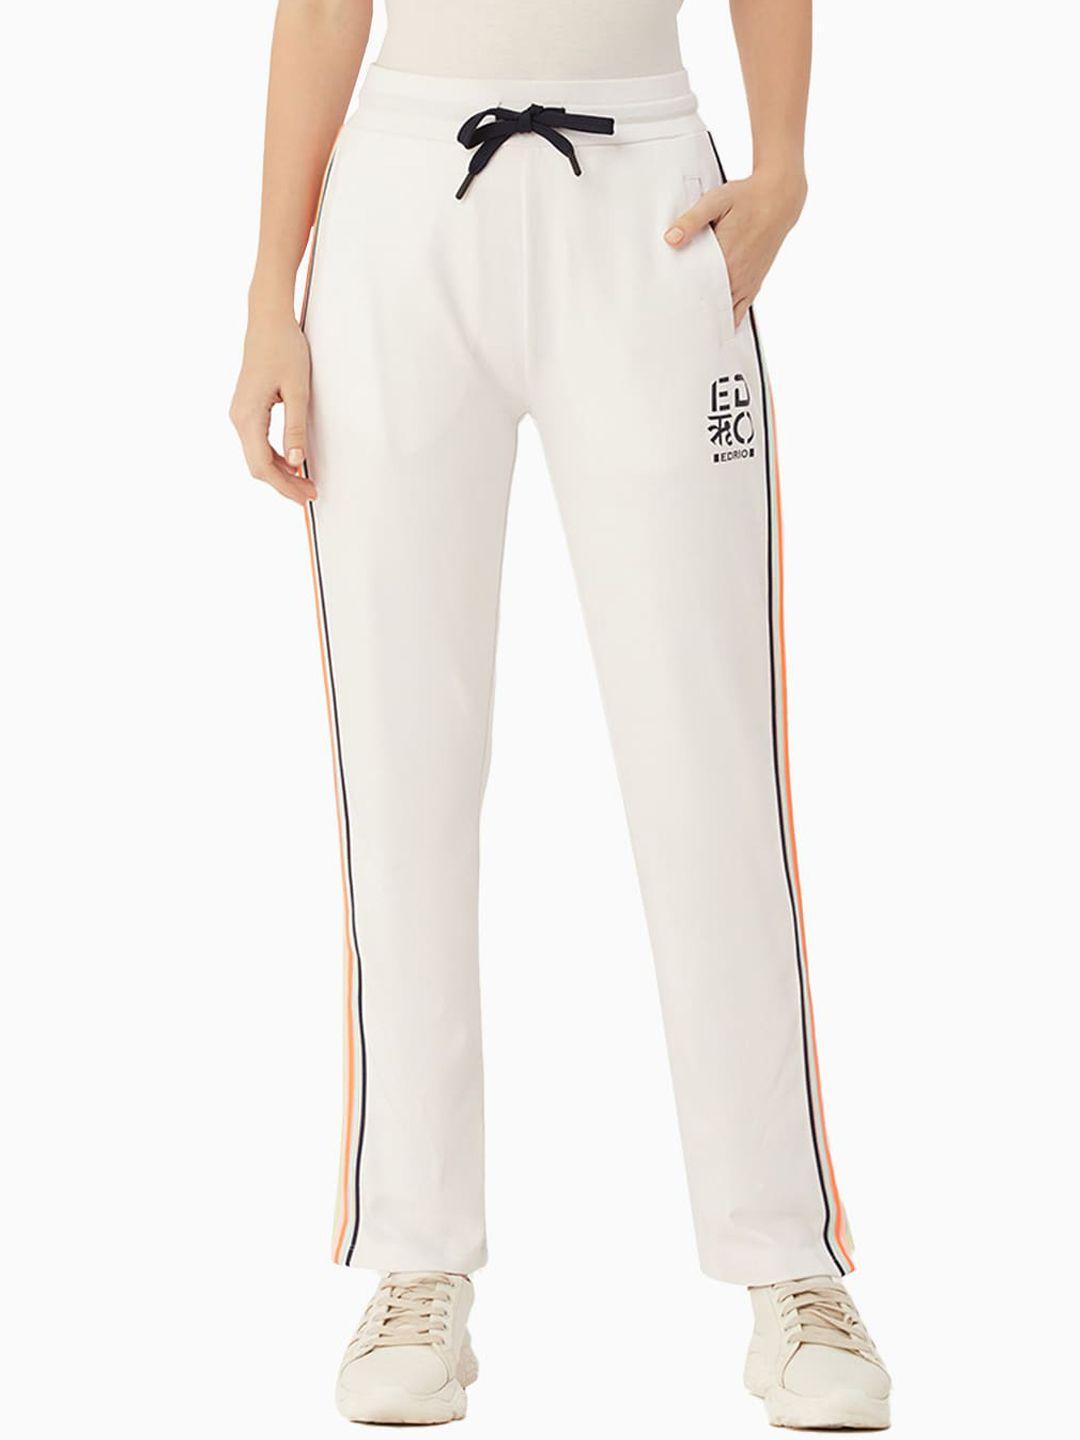 edrio-women-white-solid-cotton-track-pants-with-side-stripes